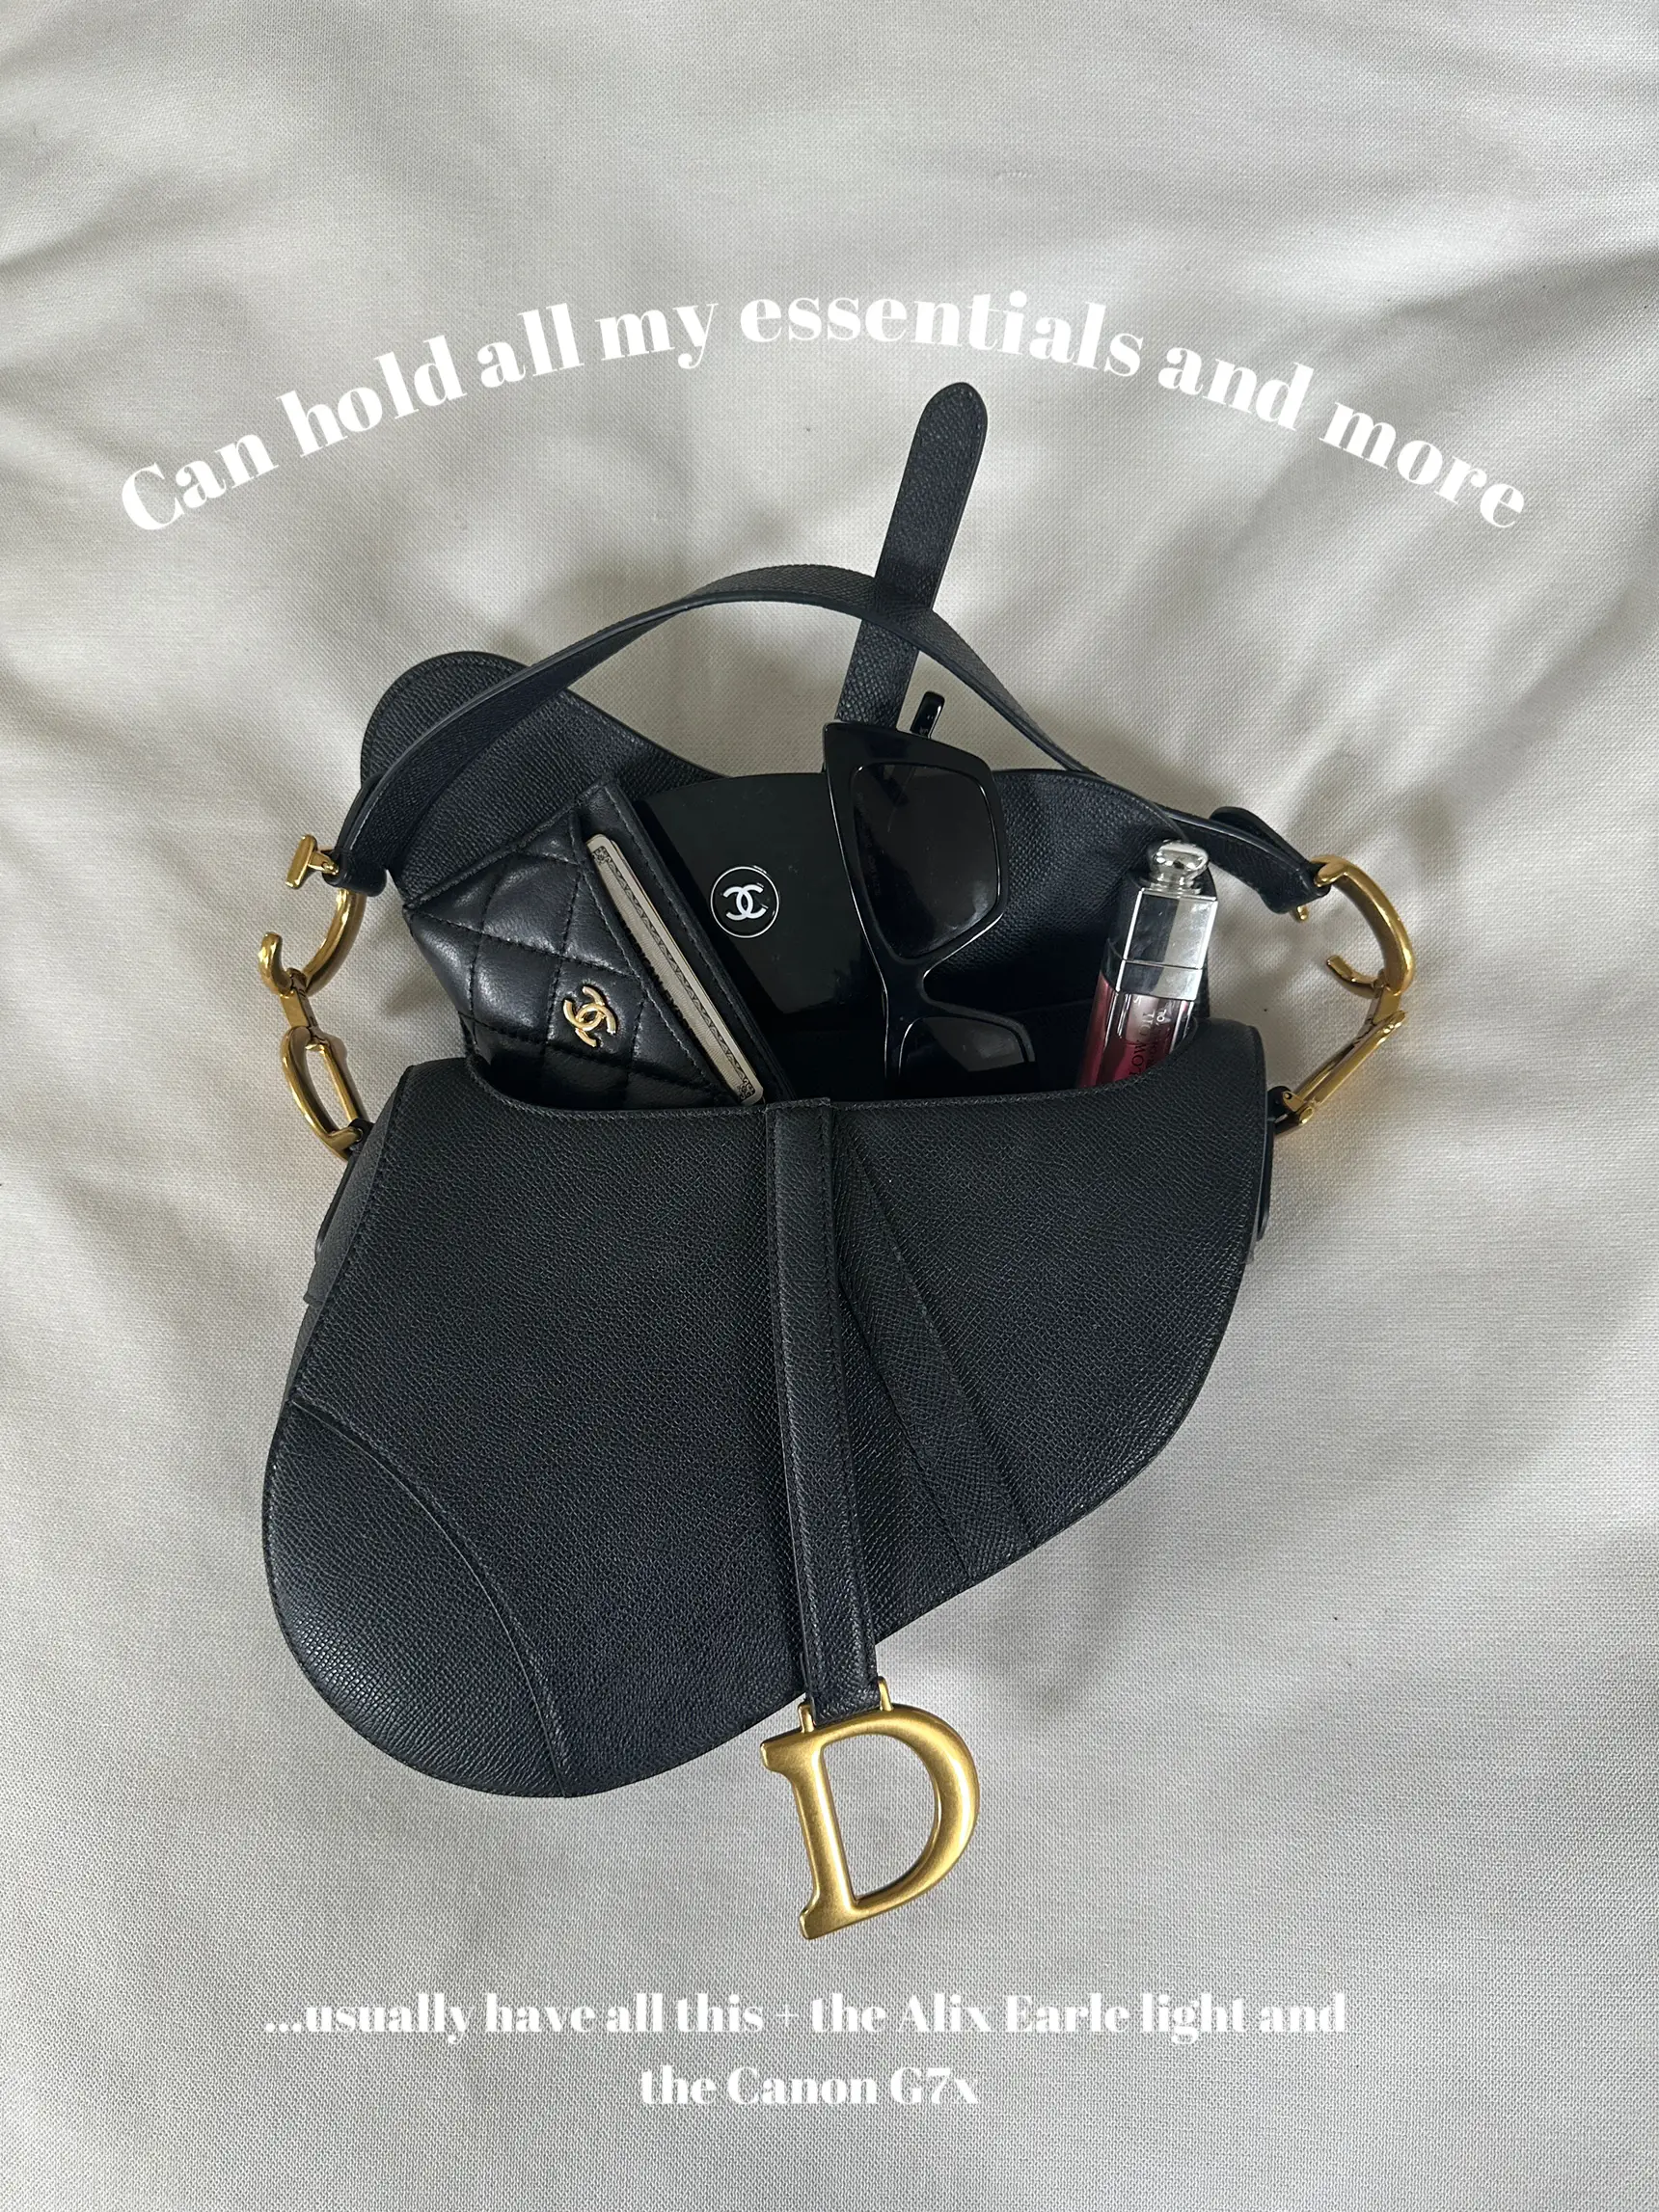 DIOR SADDLE BAG, 2 year Honest Review, Pros & Cons